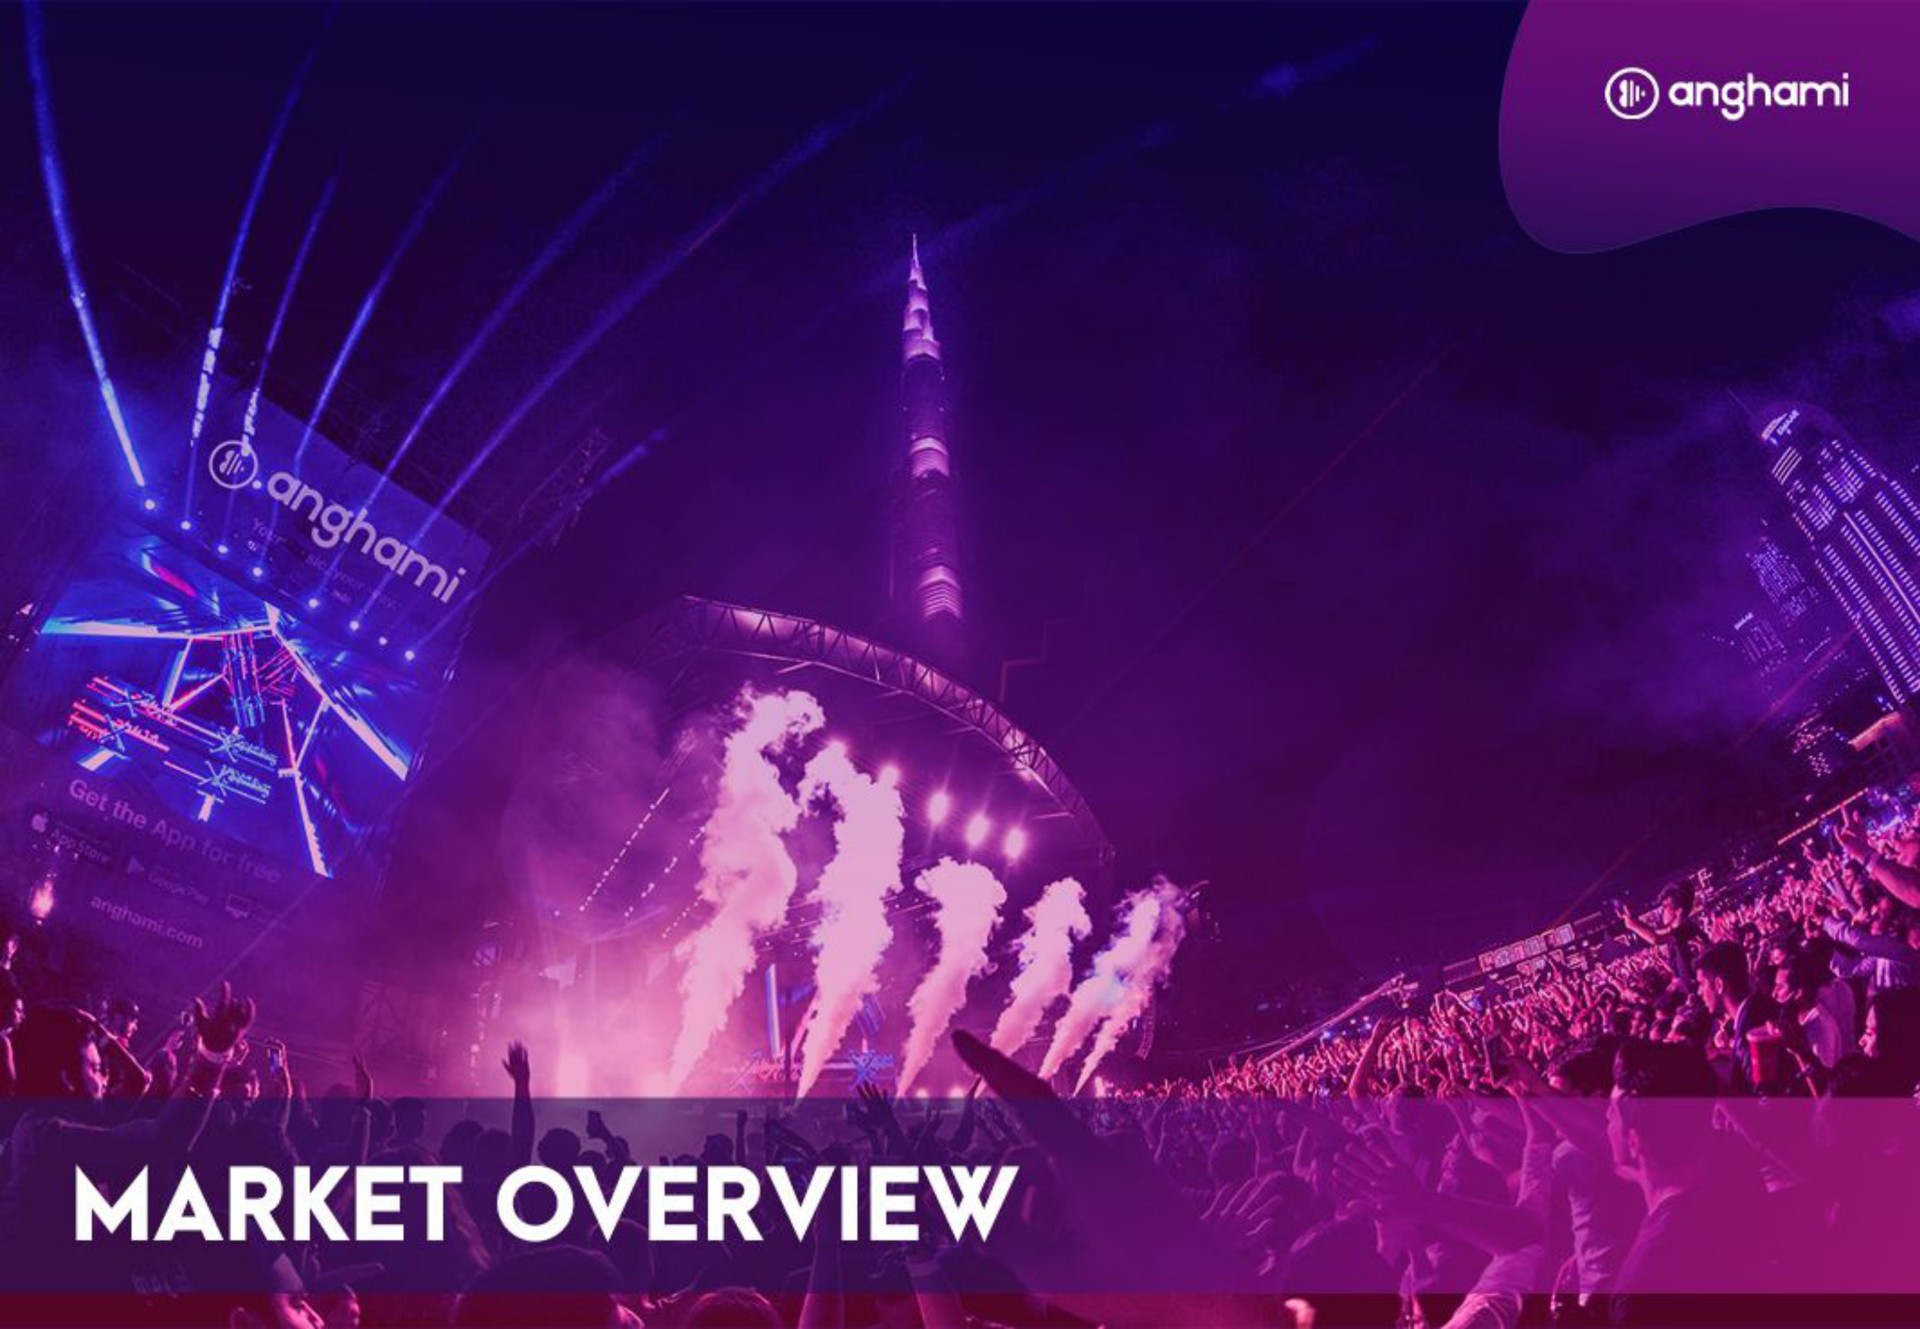 market overview | Anghami